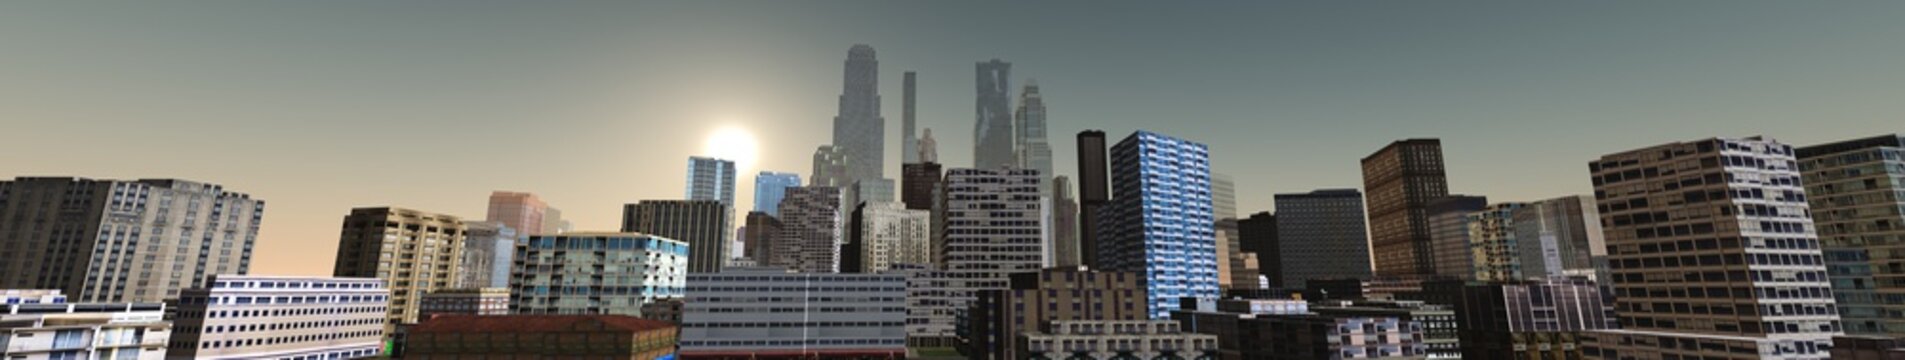 panorama of city, skyscrapers on sky background view from below, 3d rendering
